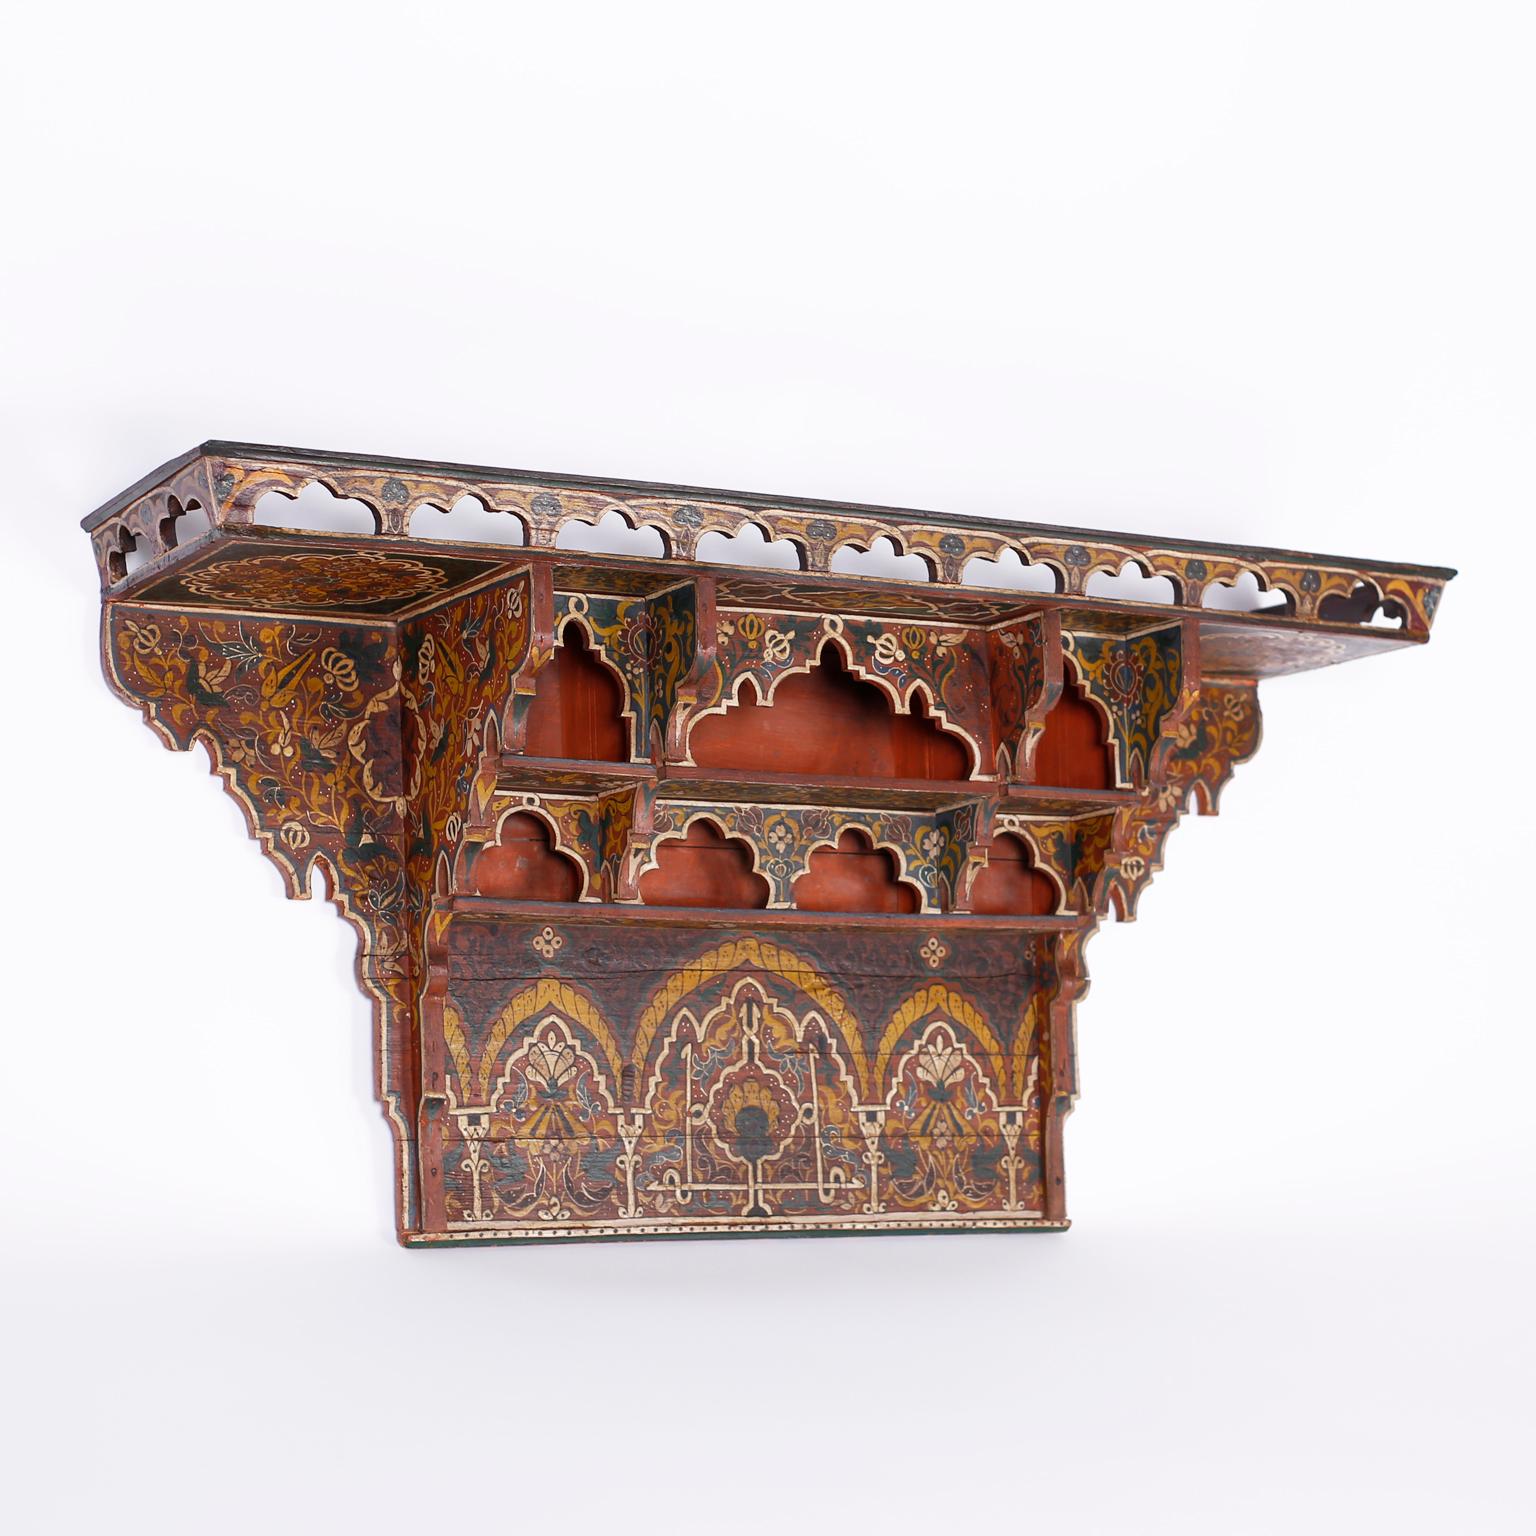 Moroccan wall shelf decorated with symbolic designs in distinctive mediterranean colors, with a gallery on top and architecturally interesting nooks.